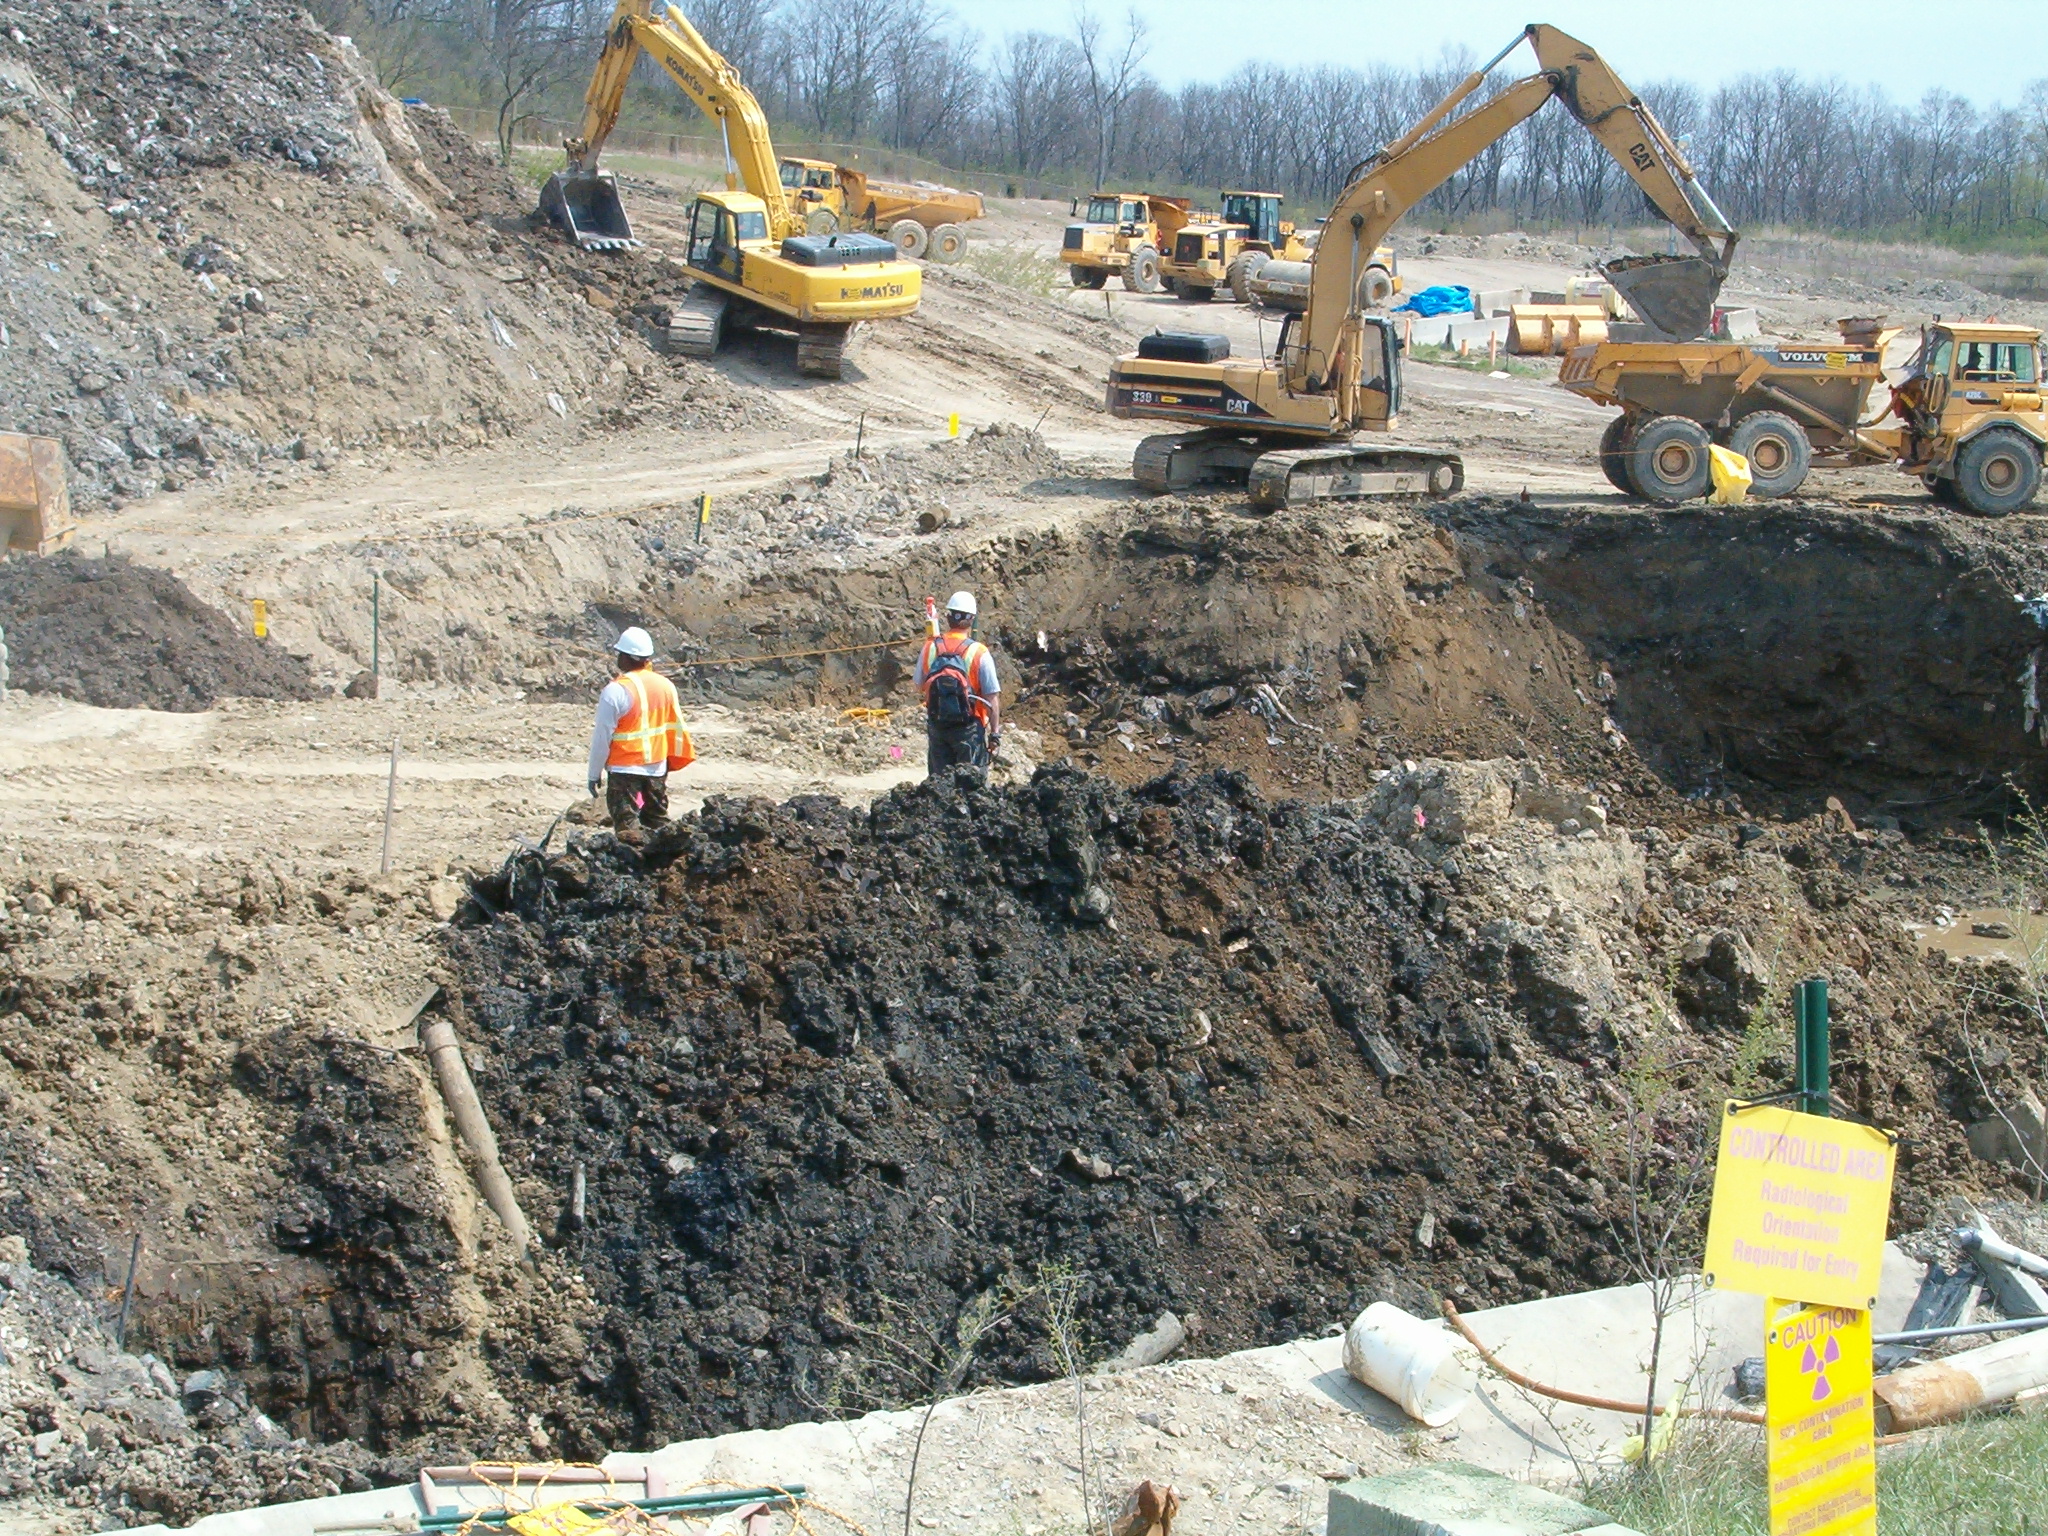 Portage is an expert at environmental cleanup work, which includes excavating, loading and hauling waste, and accepting, placing and compacting that waste at separate disposal sites. Photos courtesy of North Wind Group.